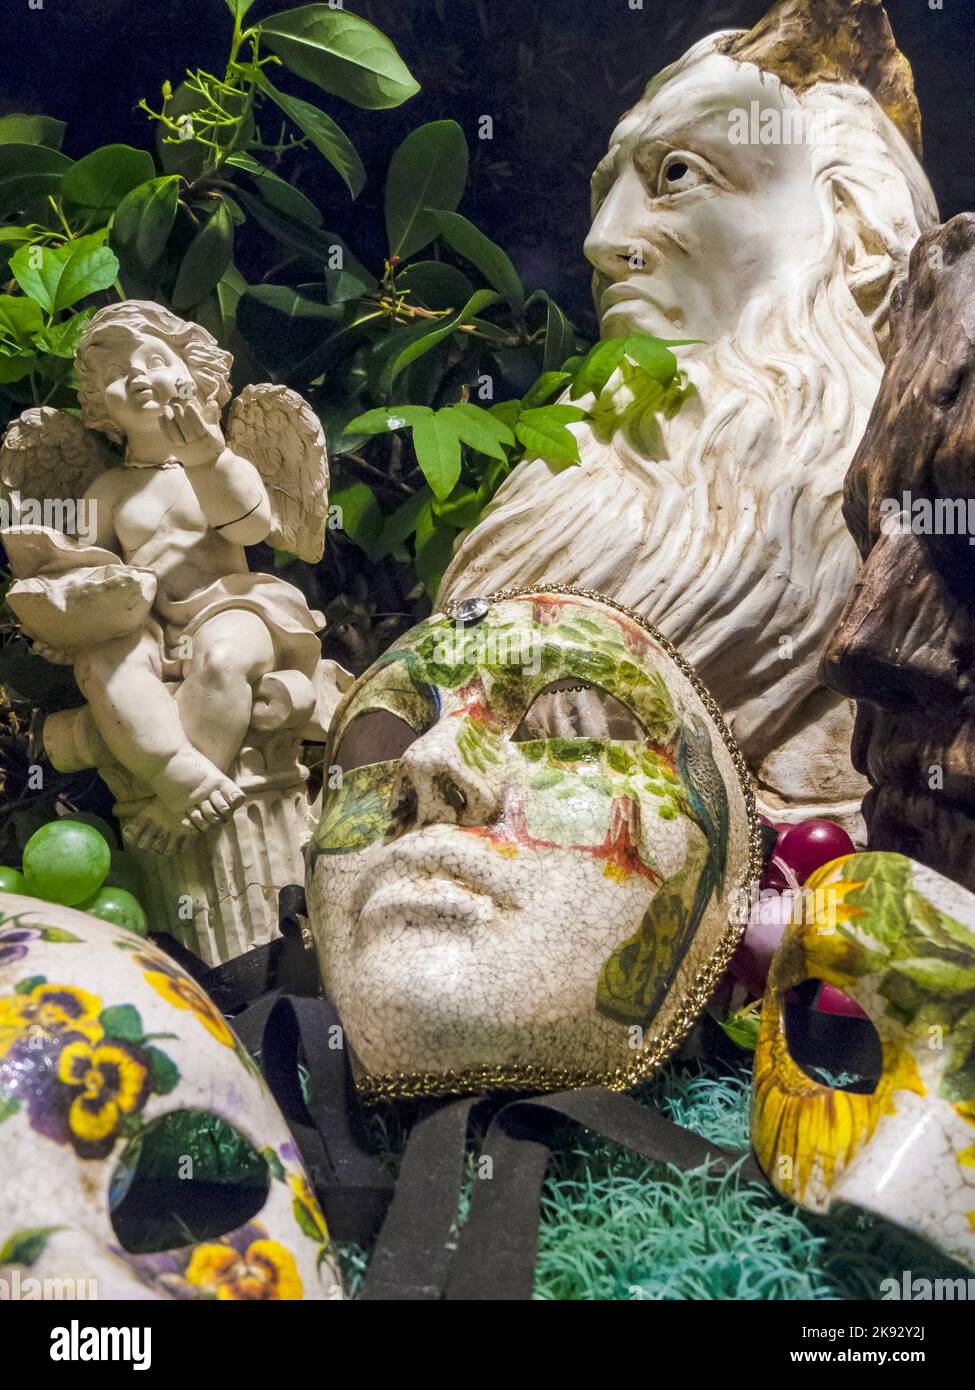 VENICE, ITALY - SEP 12, 2014: Venetian masks as symbol for the venetian carnival lying in the shop in Venice, Italy. Wearing a mask is an old traditio Stock Photo